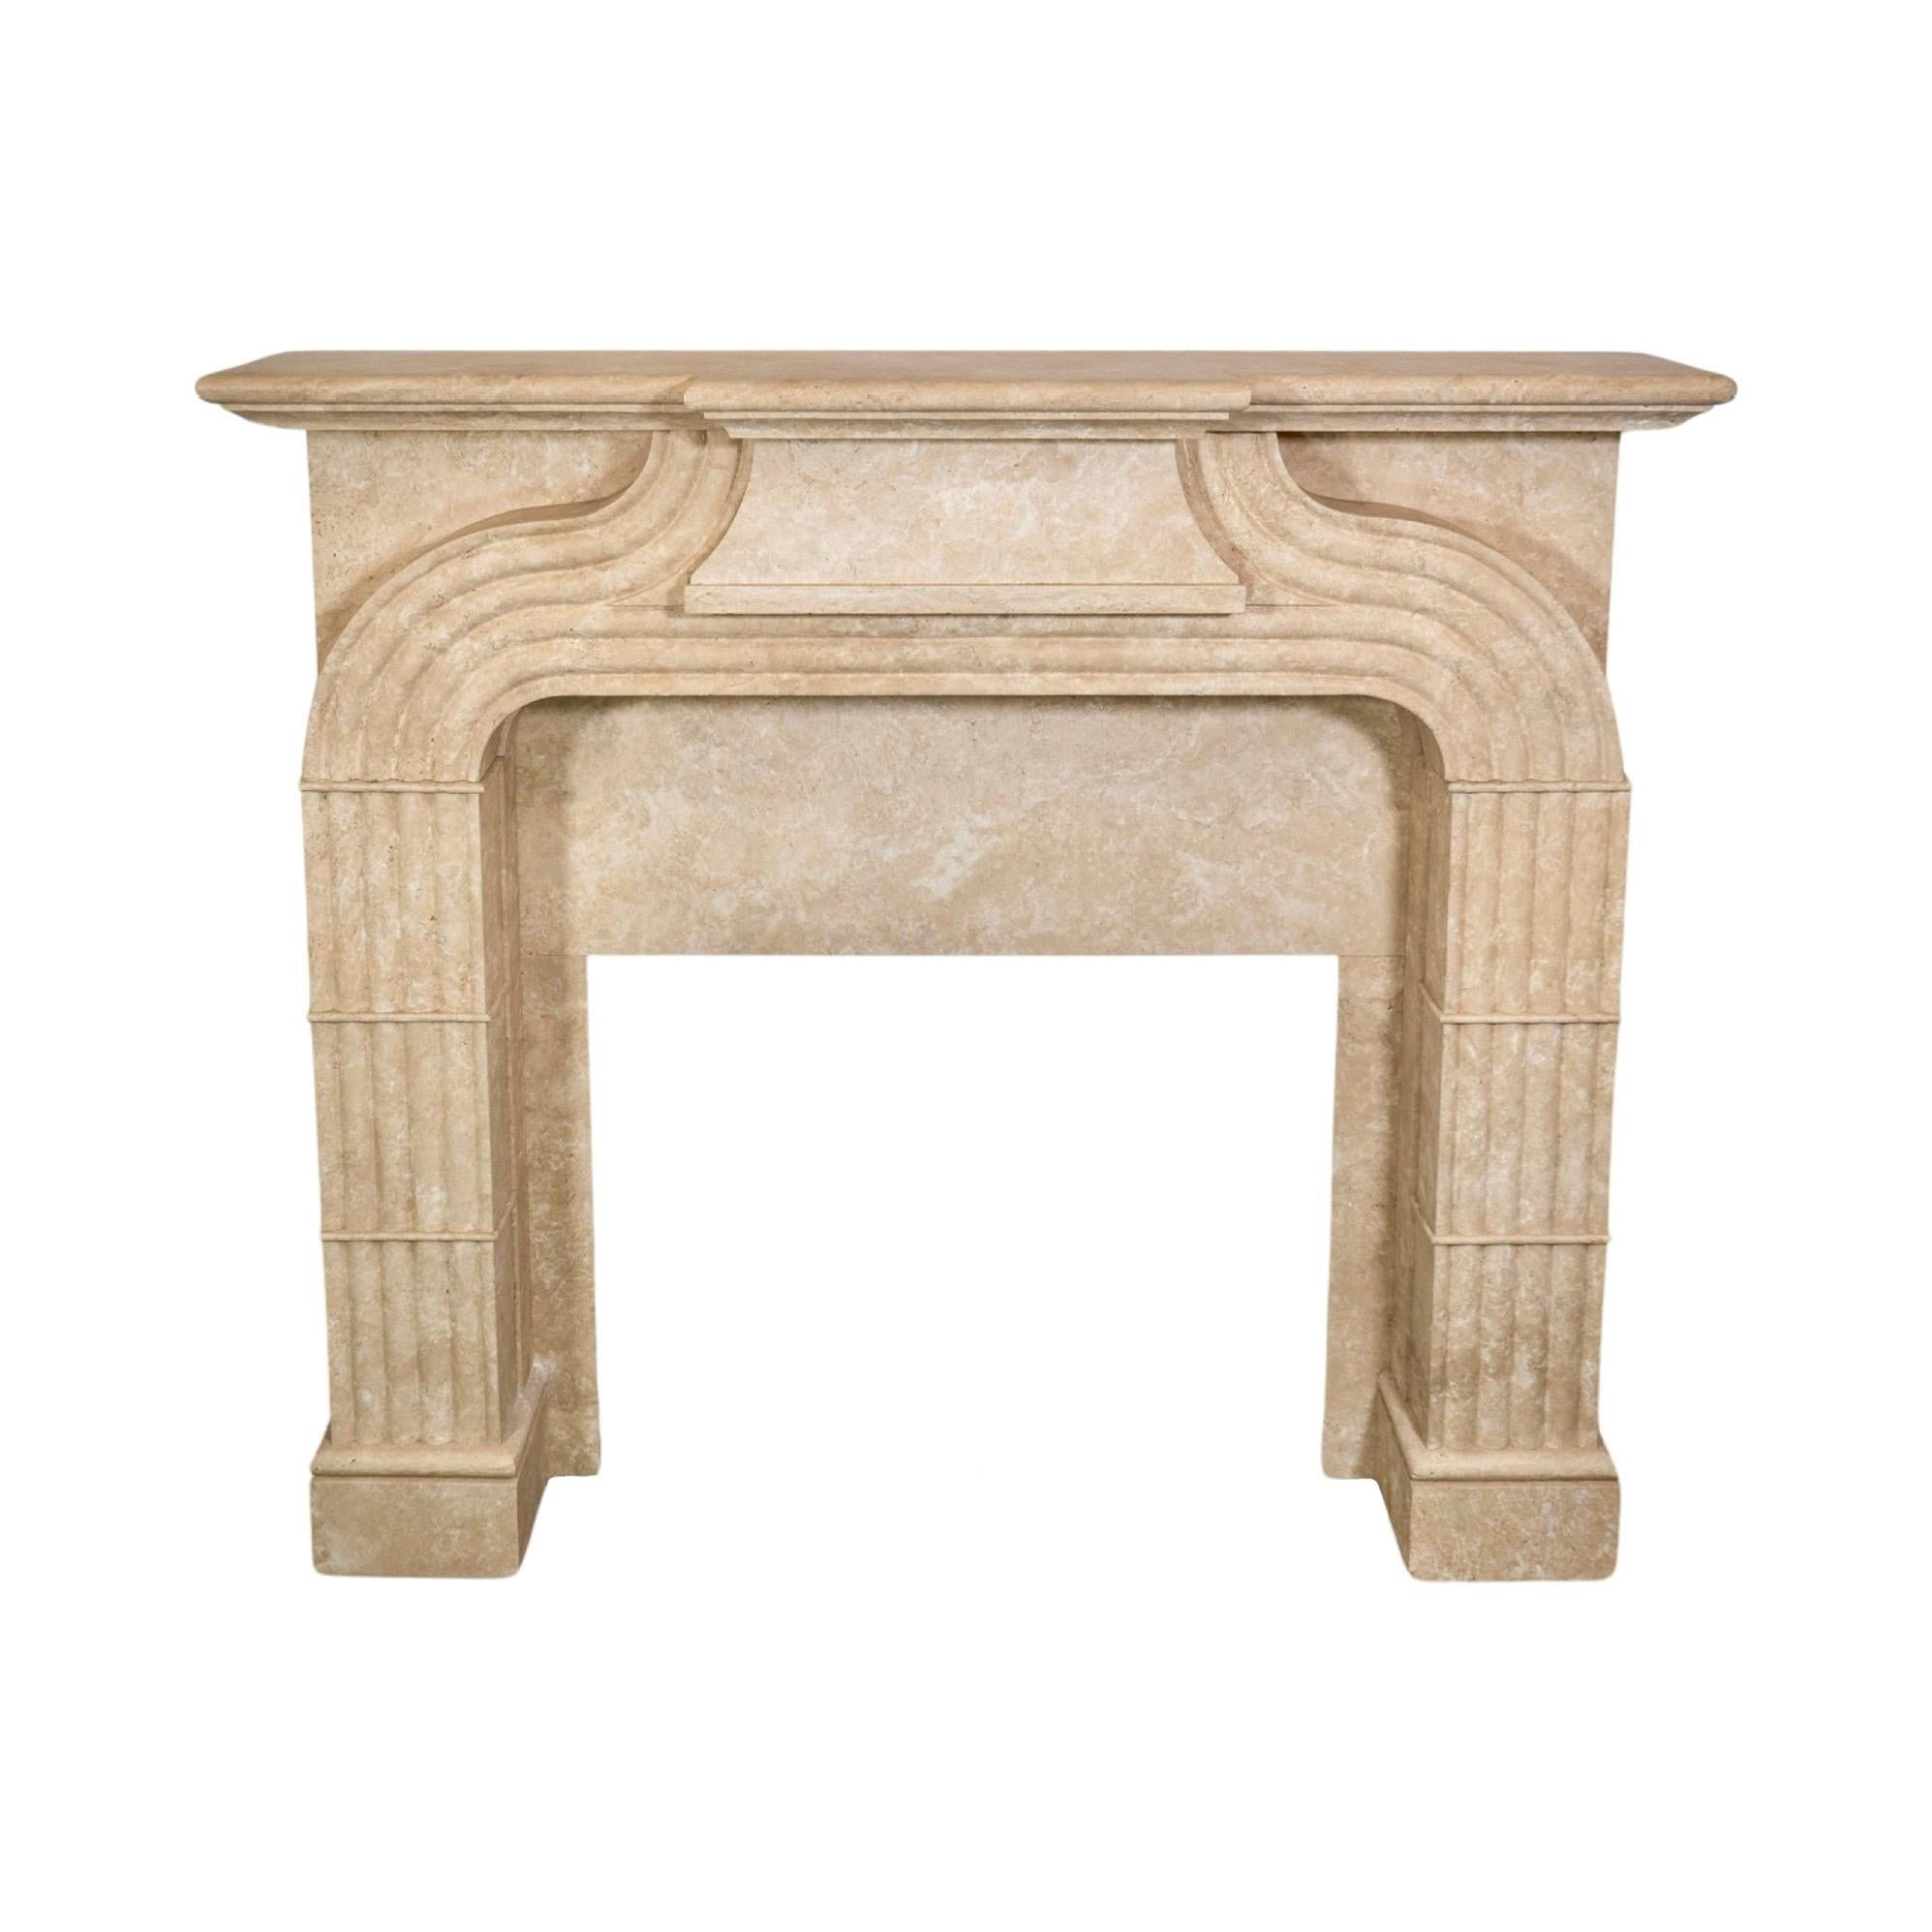 This unique Italian Travertine Mantel is crafted from the finest natural travertine stone, hand-carved in the 1940s with exquisite details. Boasting a timeless design, it's sure to stand the test of time and make a statement in any home.